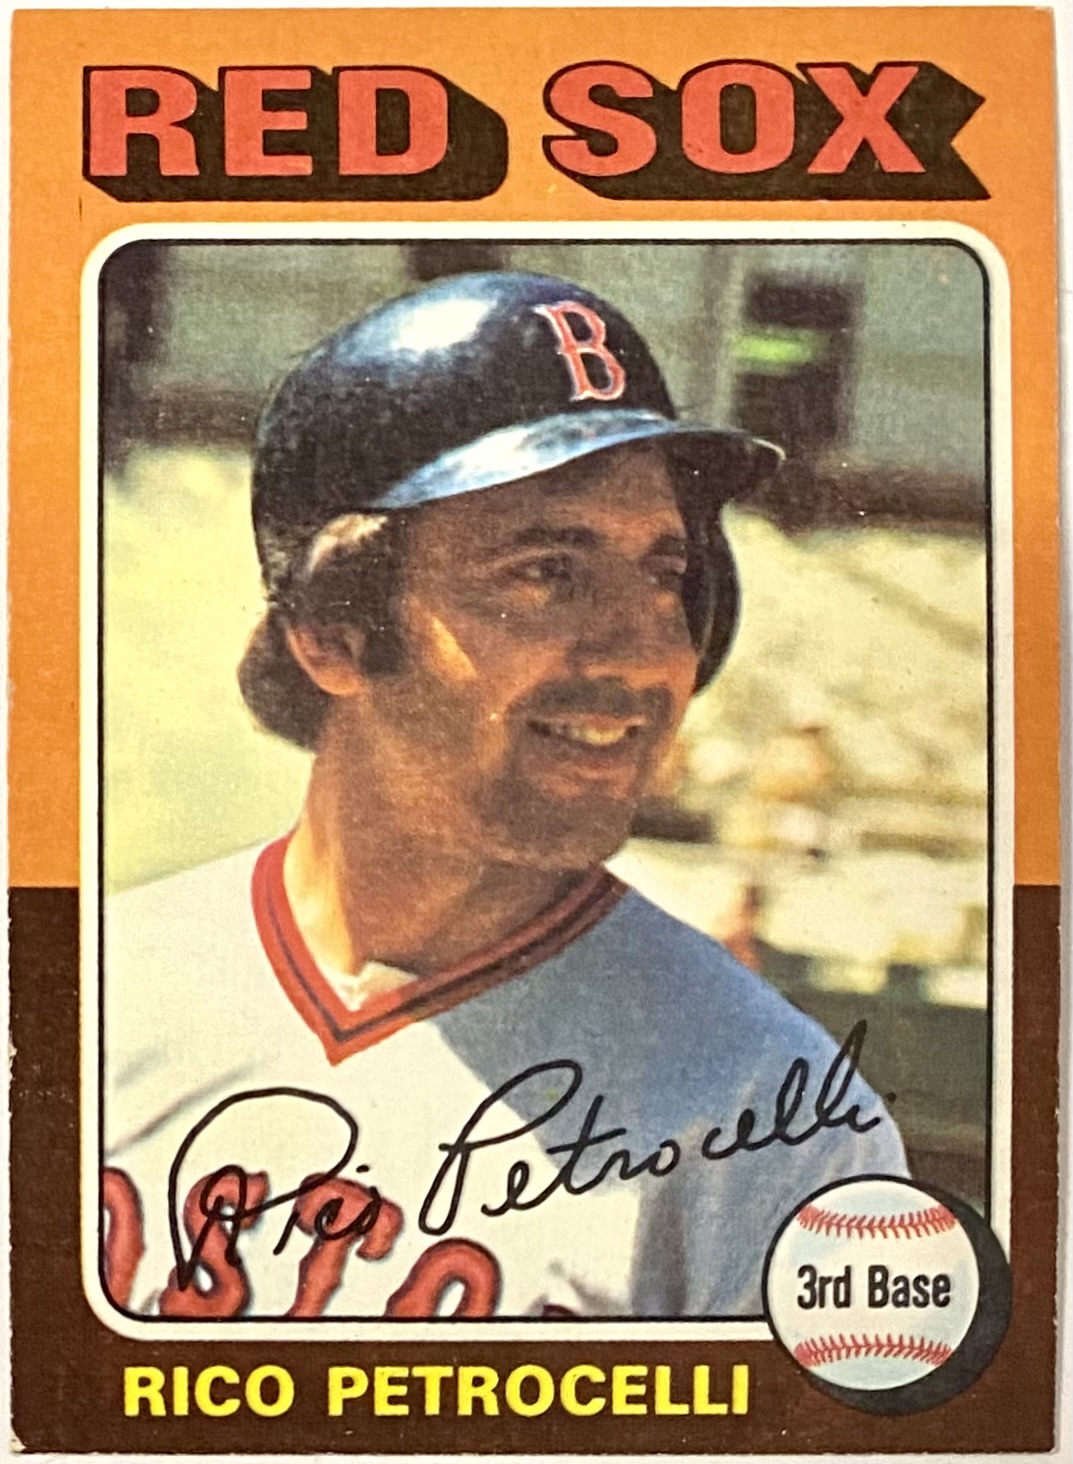 1975 red sox